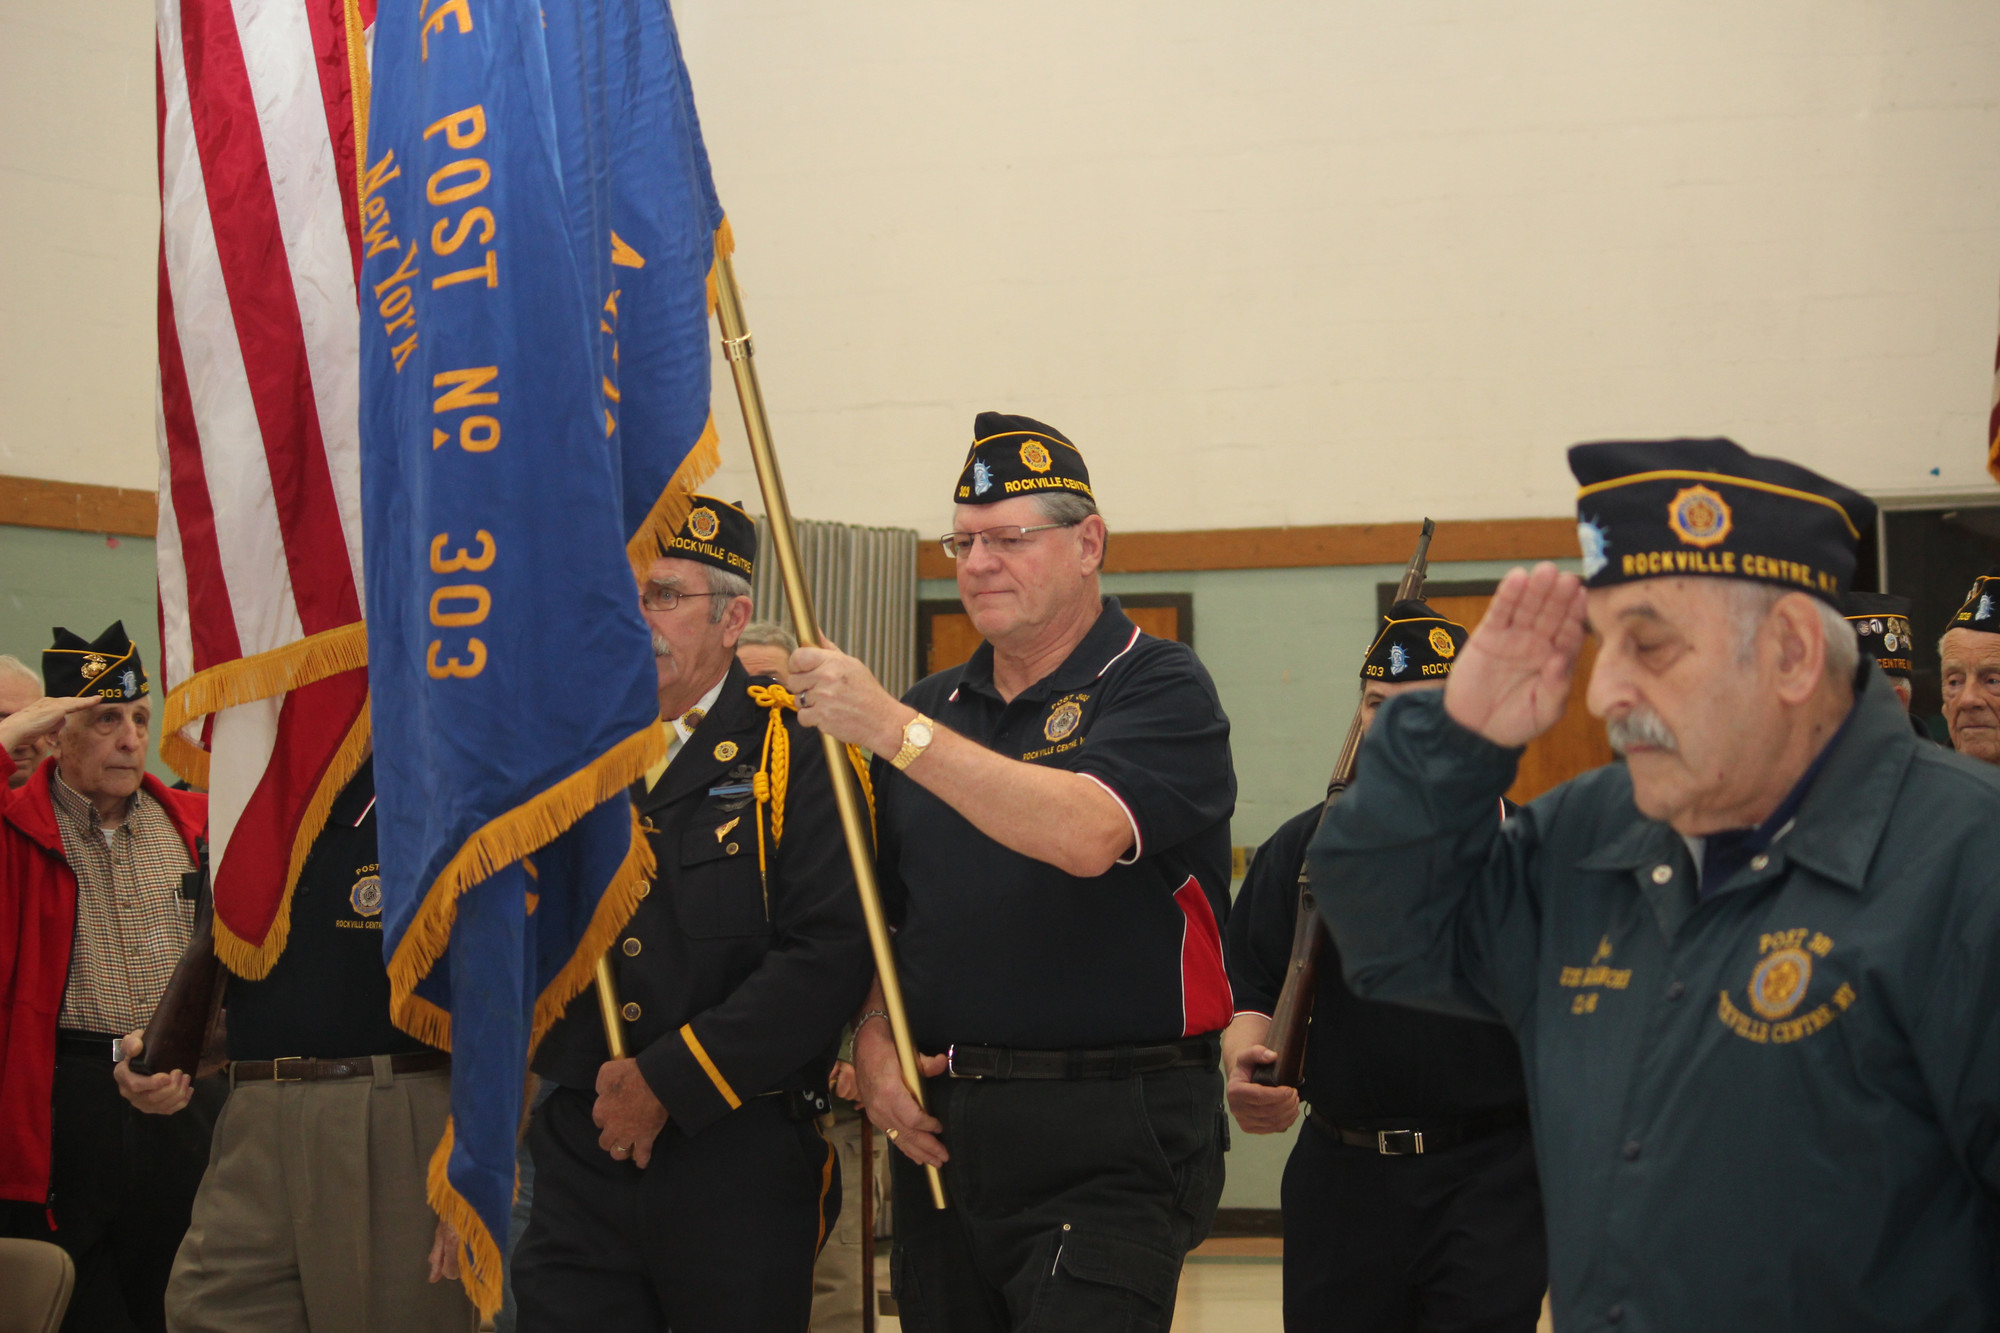 Photos by Theresa Press/Herald
The American Legion Post 303 Color Guard started the ceremony. Vietnam veteran Michael Lapkowski,left, carried in the American flag while fellow Vietnam veteran Walter Paruch carried the Legion’s blue flag..